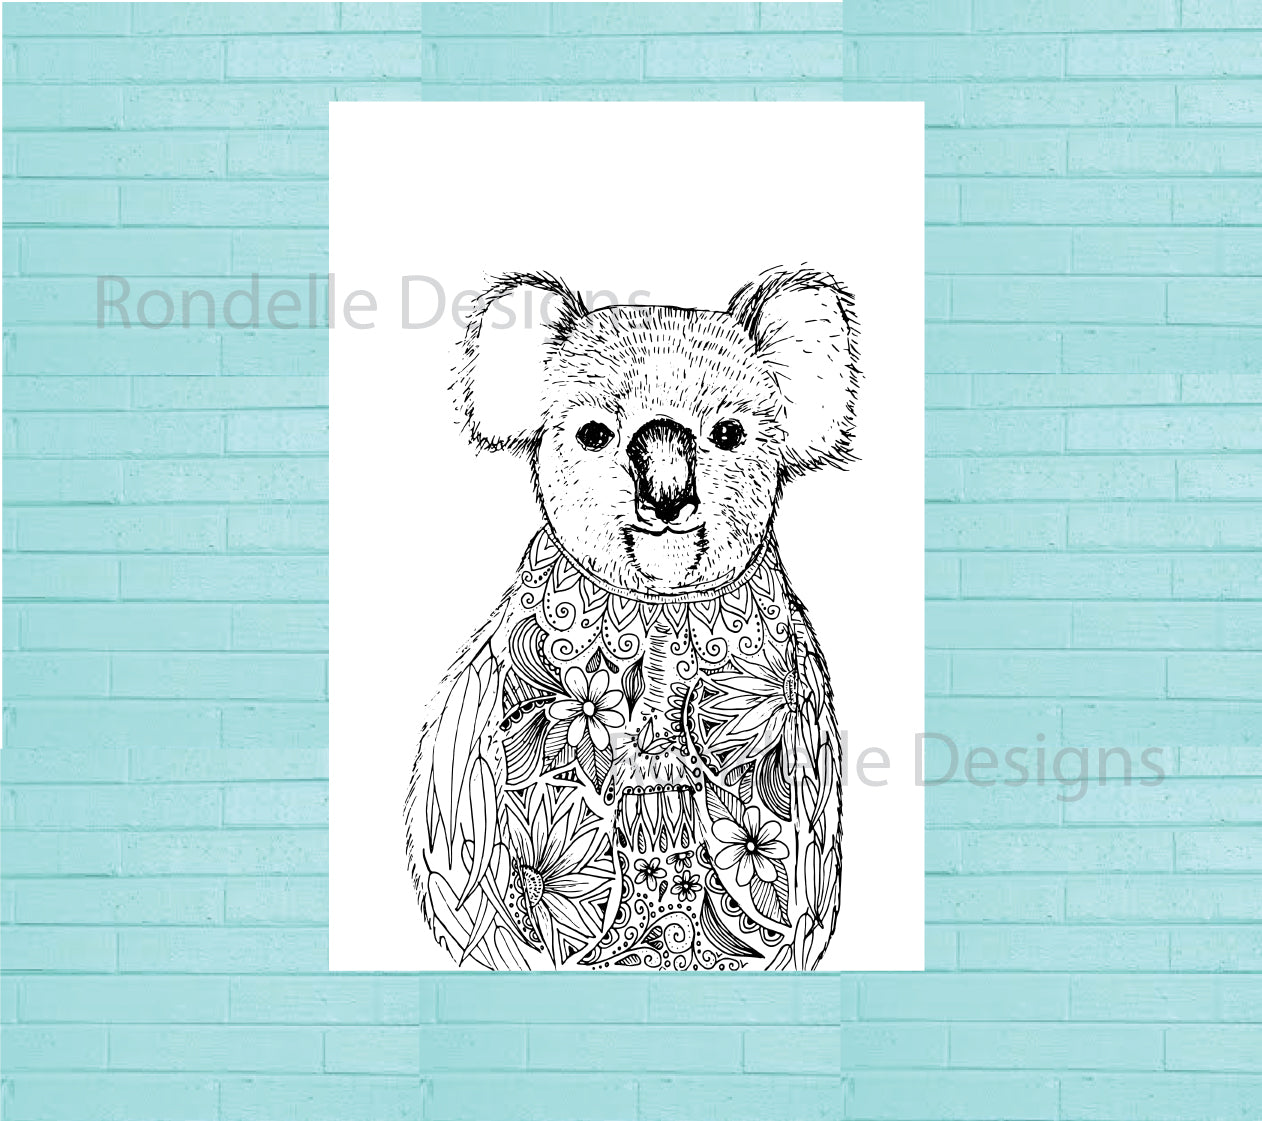 Colouring in printable art